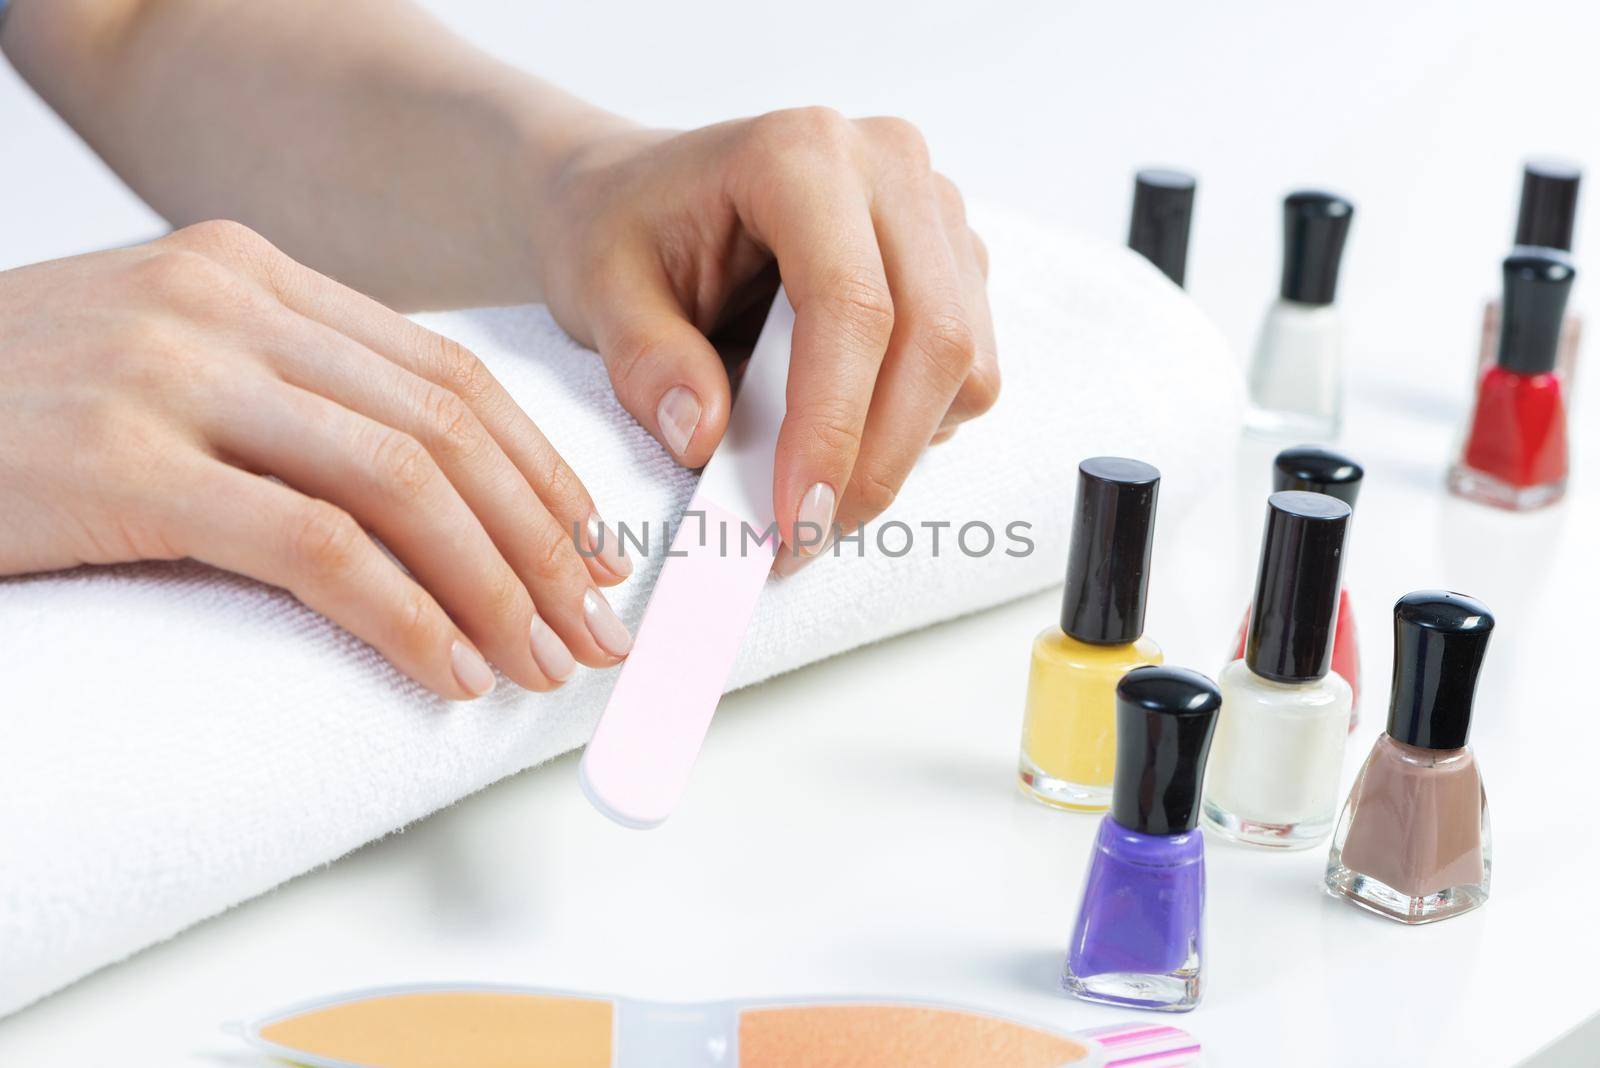 Woman using nail file and create perfect nails shape. Colorful nail polish bottles on table. Grinding female nails with nail file. Woman doing herself nail care procedure at home. Beauty and hygiene